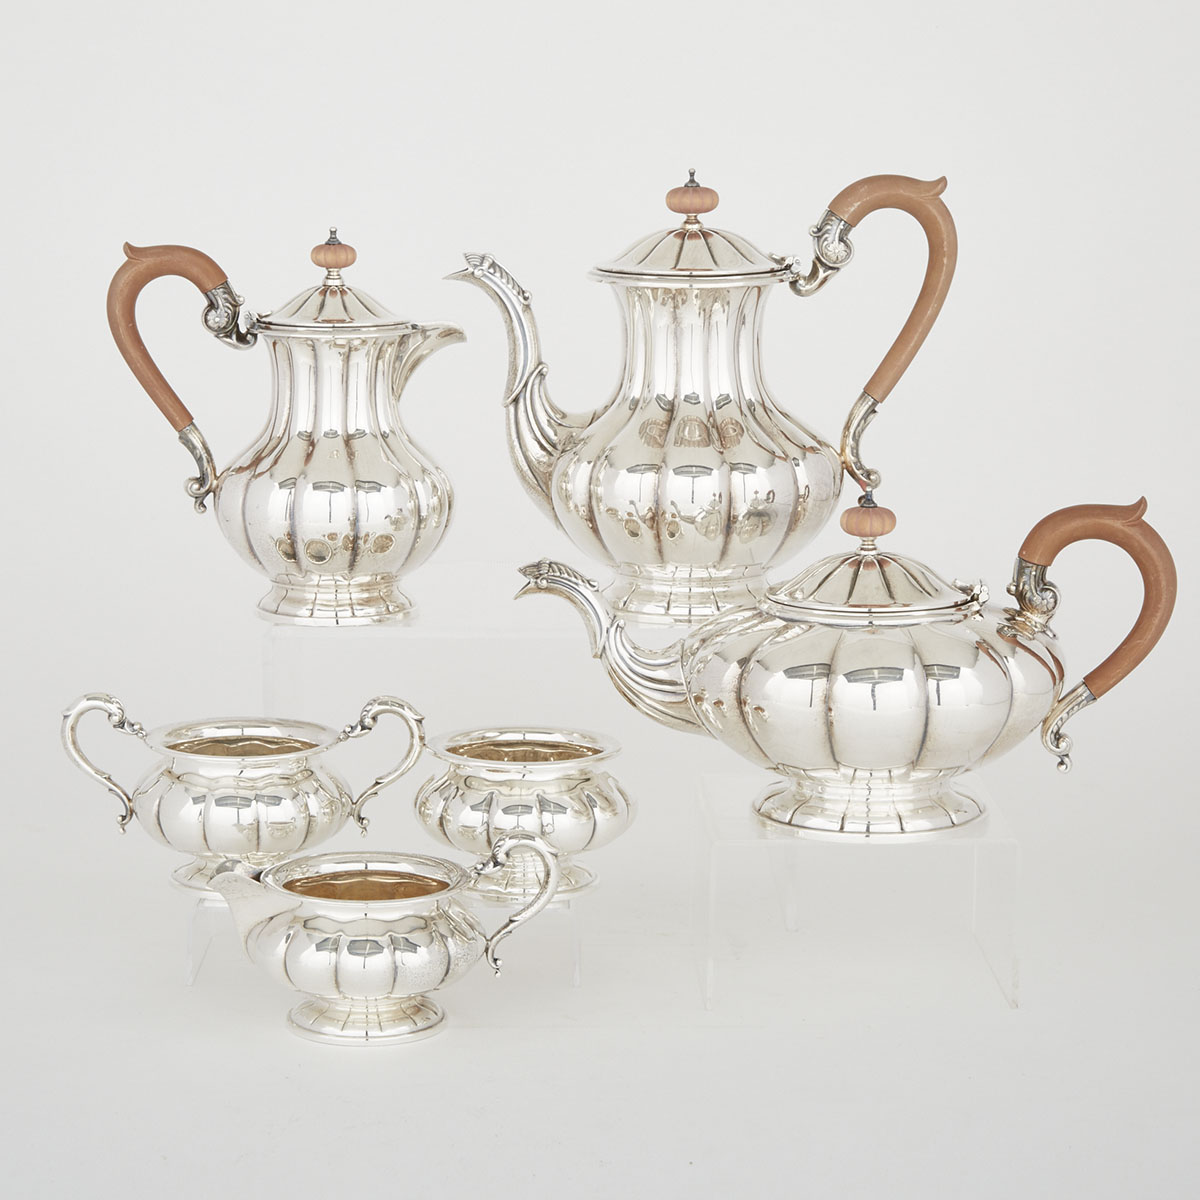 Canadian Silver Tea and Coffee Service, Henry Birks & Sons, Montreal, Que., 1956-61